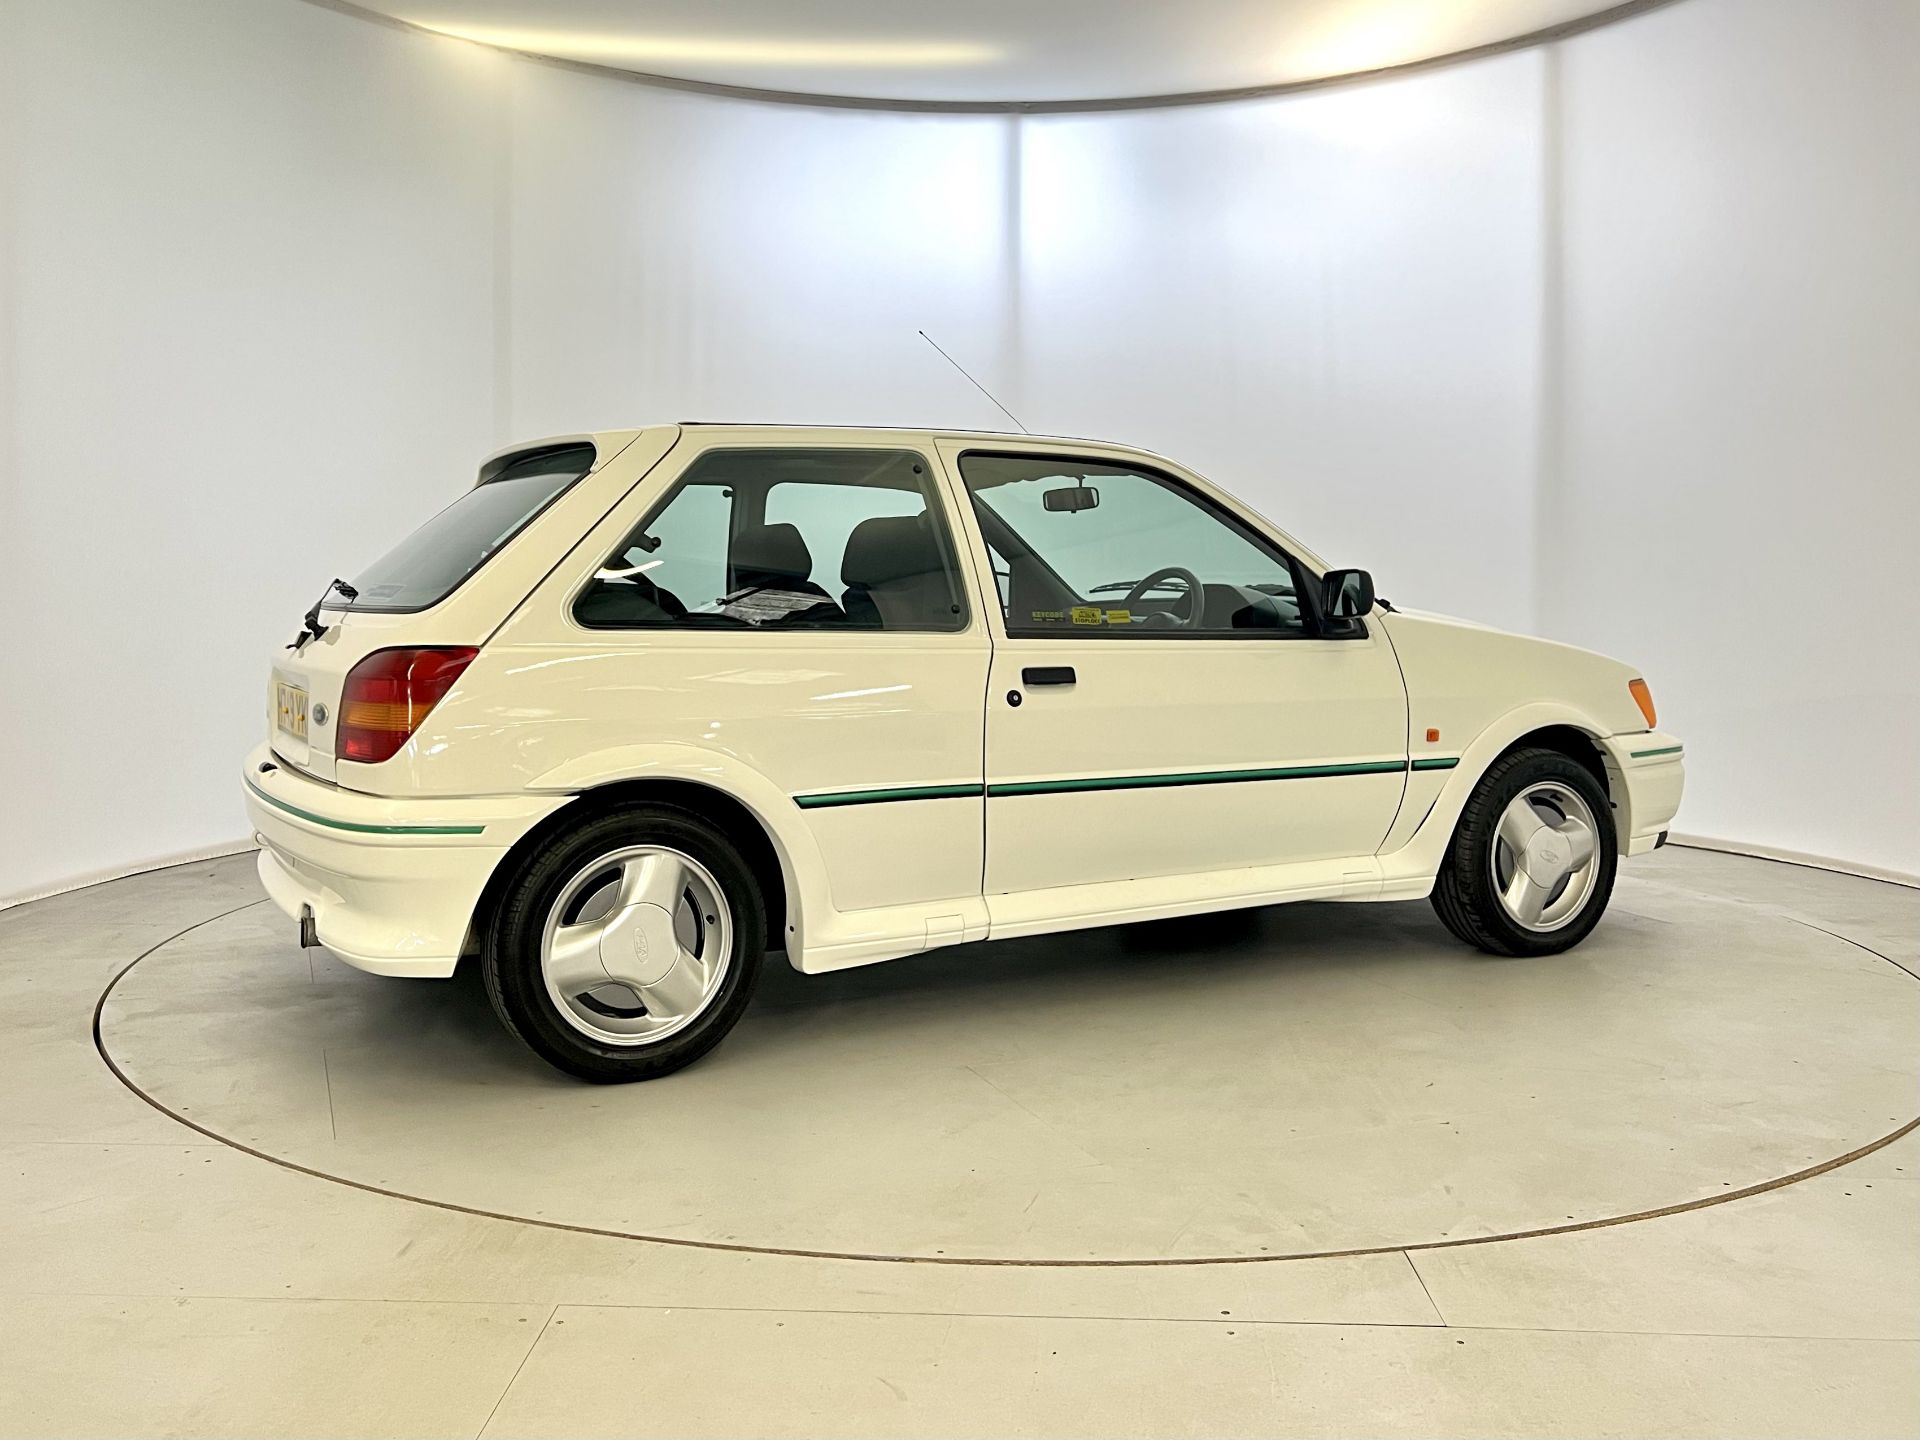 Ford Fiesta RS Turbo - Image 10 of 33